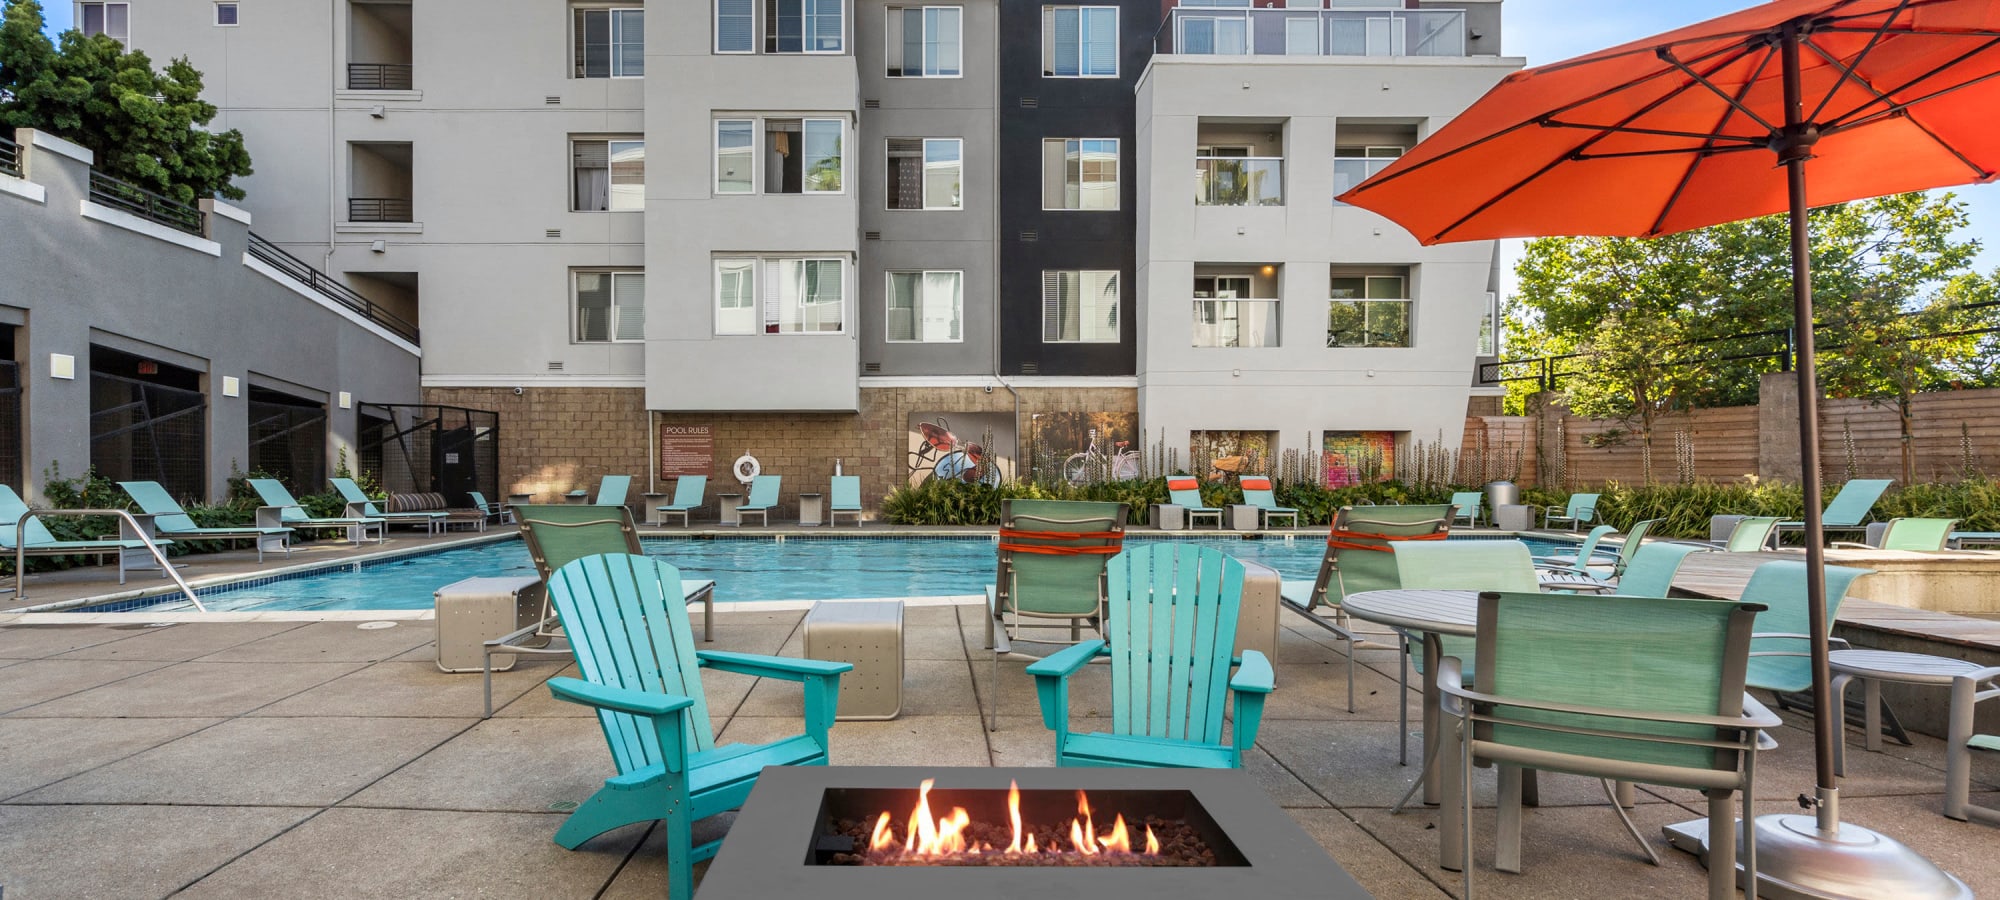 Swimming pool with fireside seating at The Bridge at Emeryville in Emeryville, California